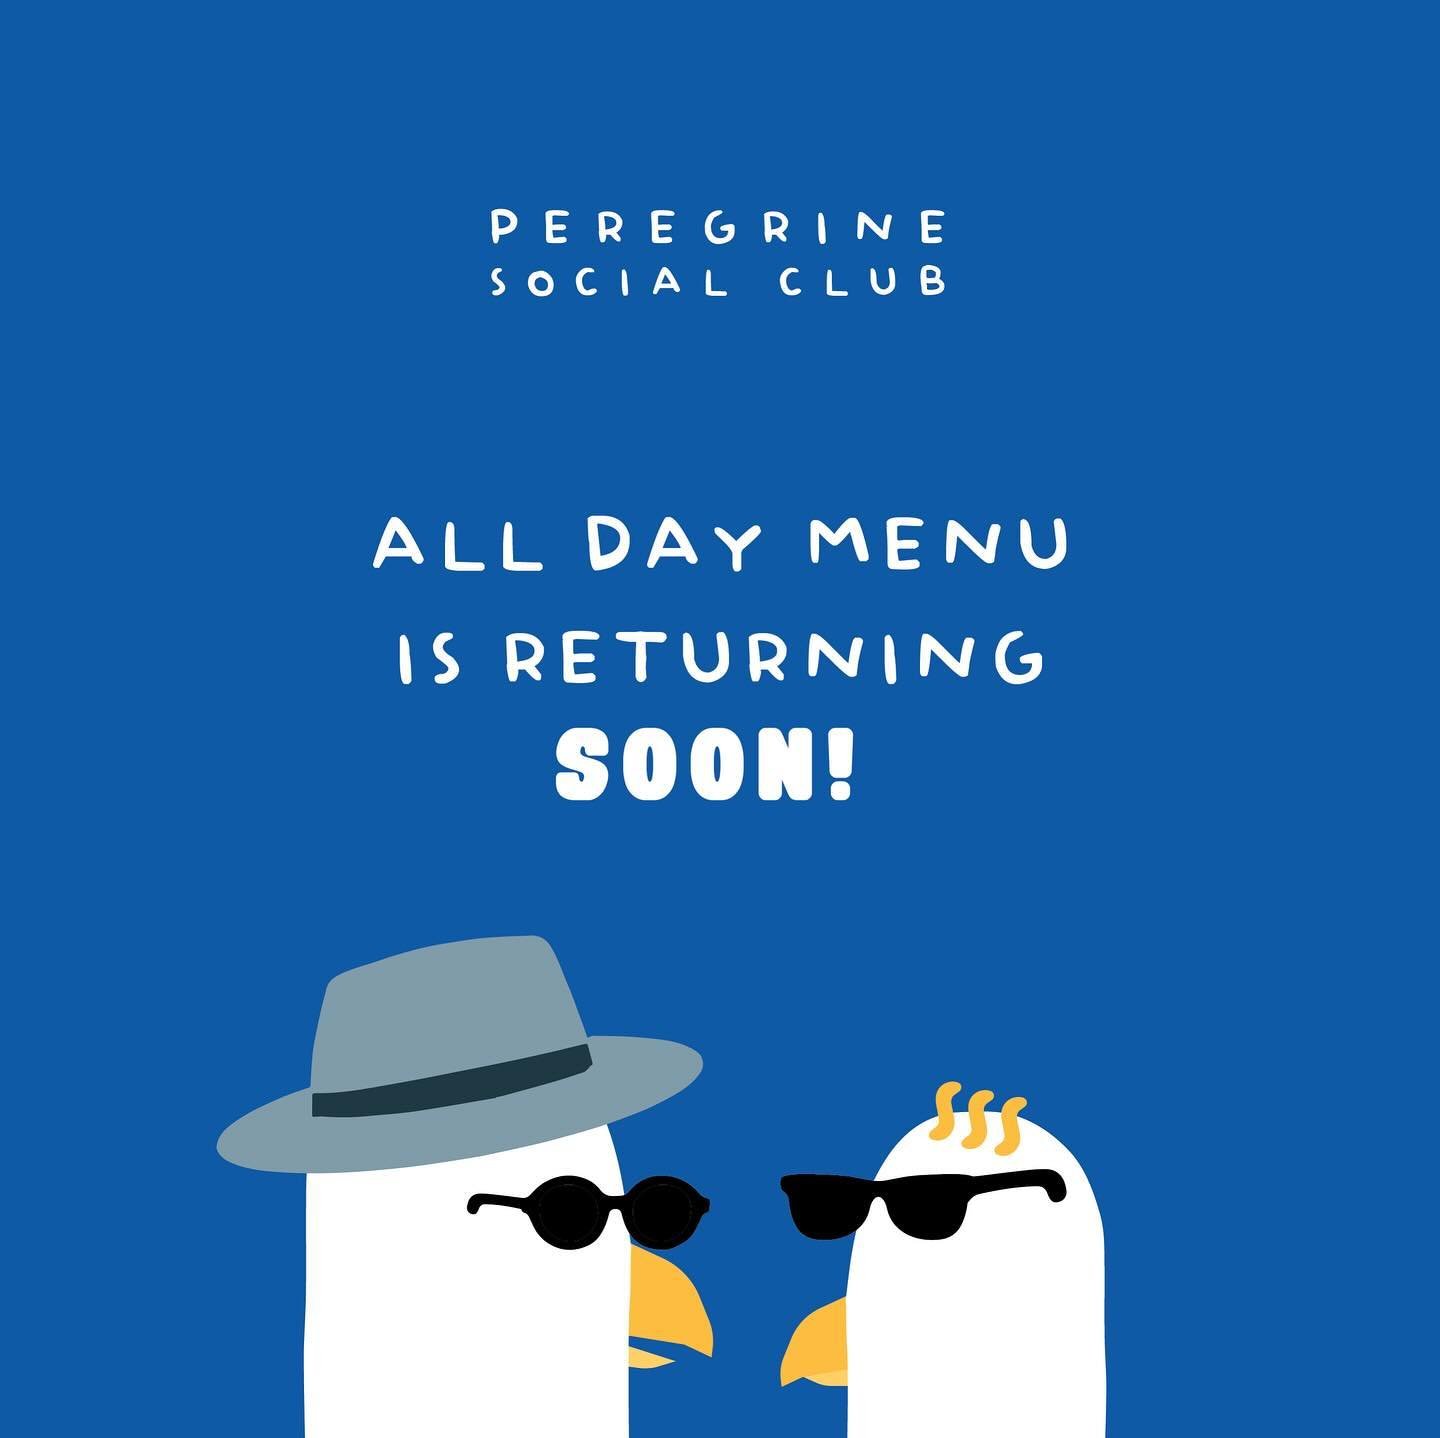 Our All-day menu is coming back shortly! We have been listening to your feedback over our first month and have plenty of changes on the way. Thank you for your patience since opening, we are working with a new team, new equipment and new venue. We ho